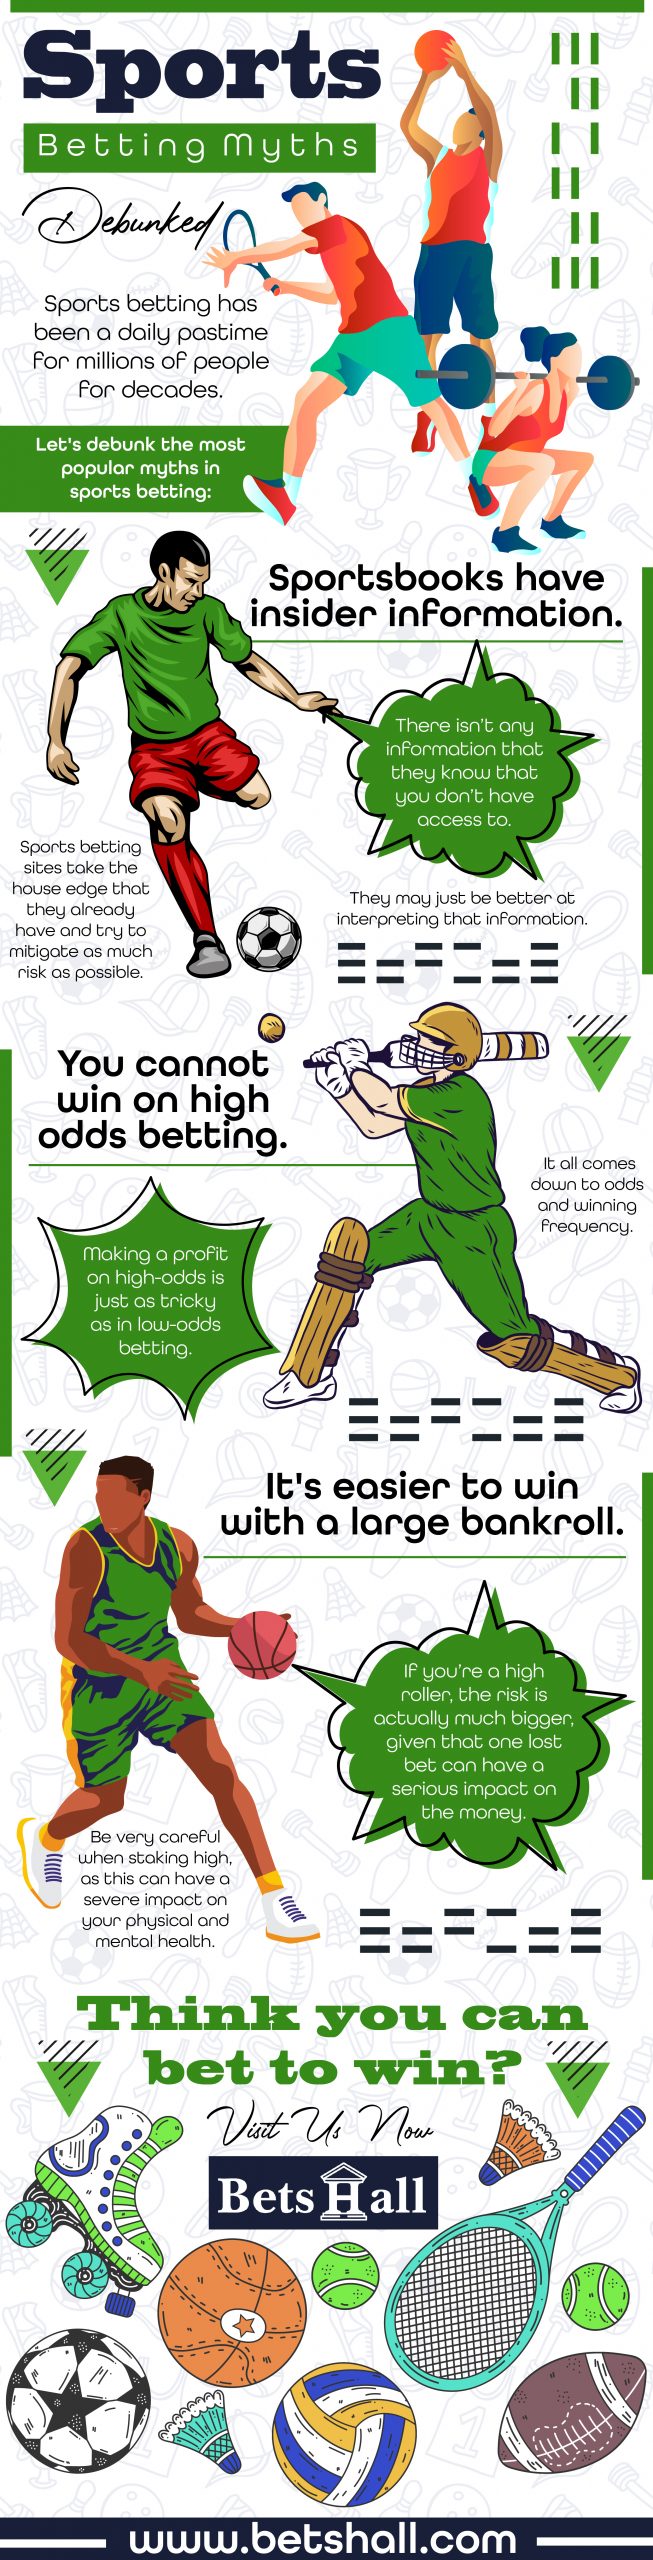 Sports Betting Myths Debunked - Infograph